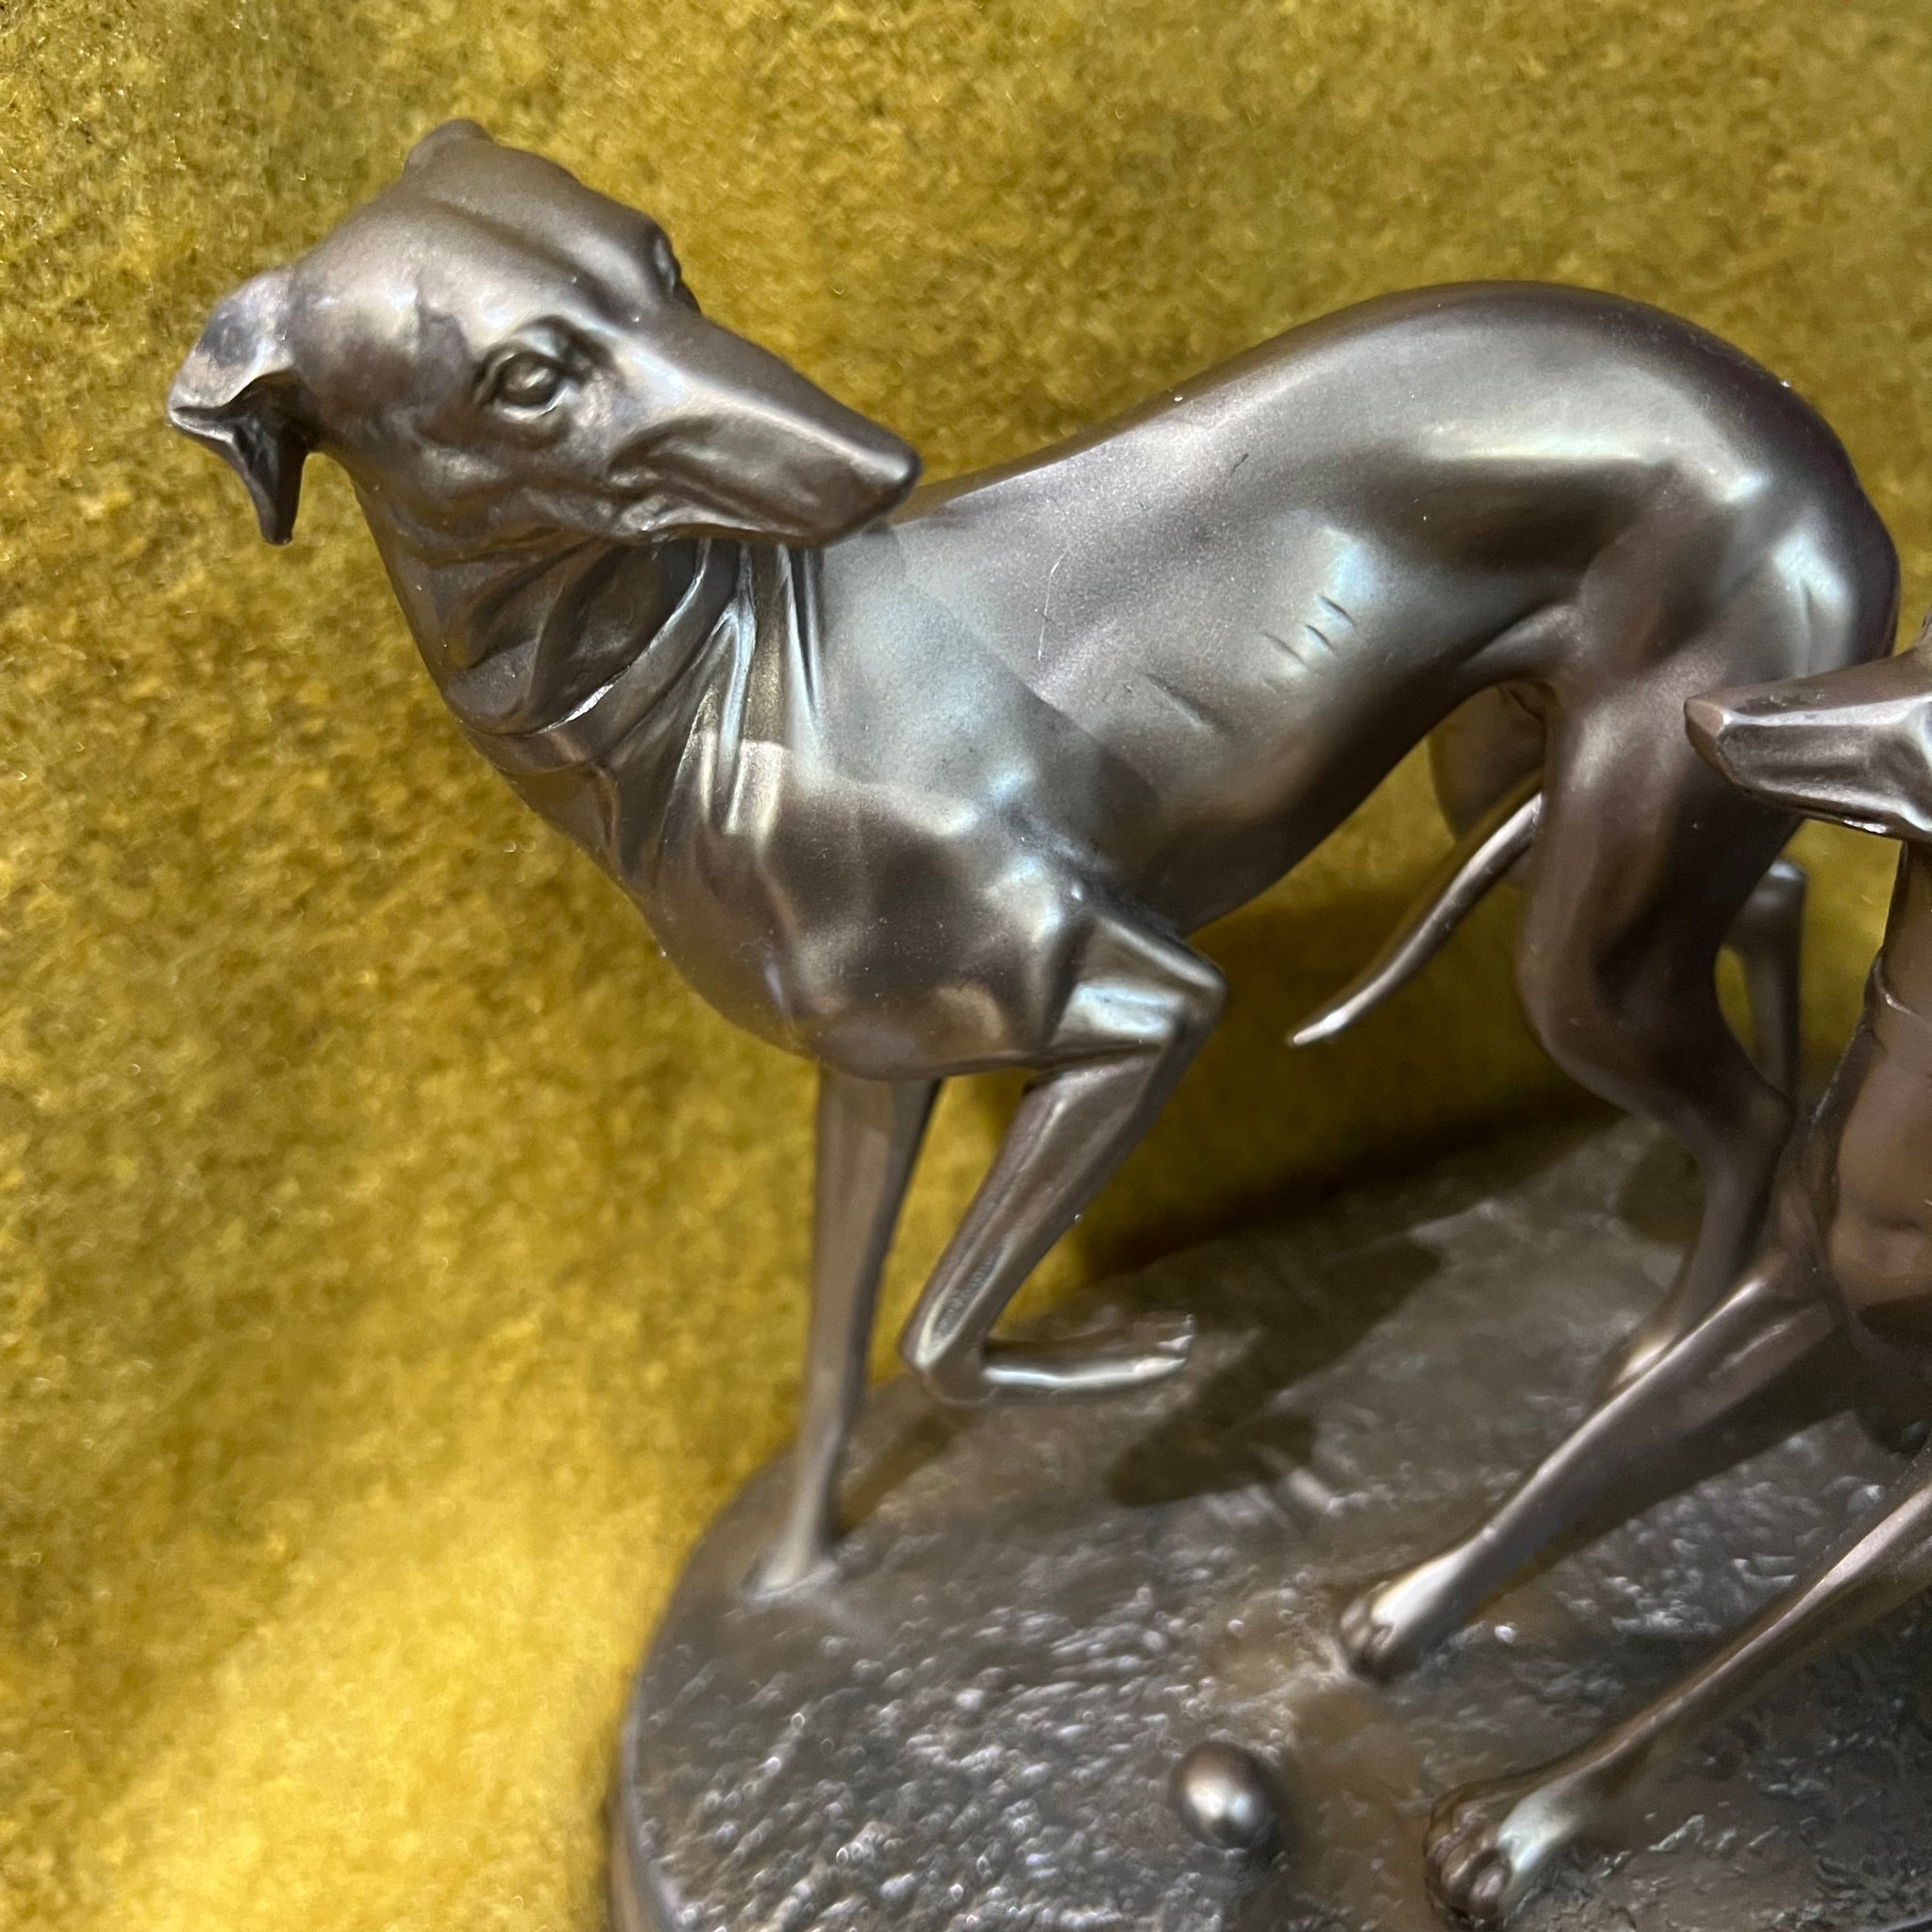 Figurine Pair of Whippets 